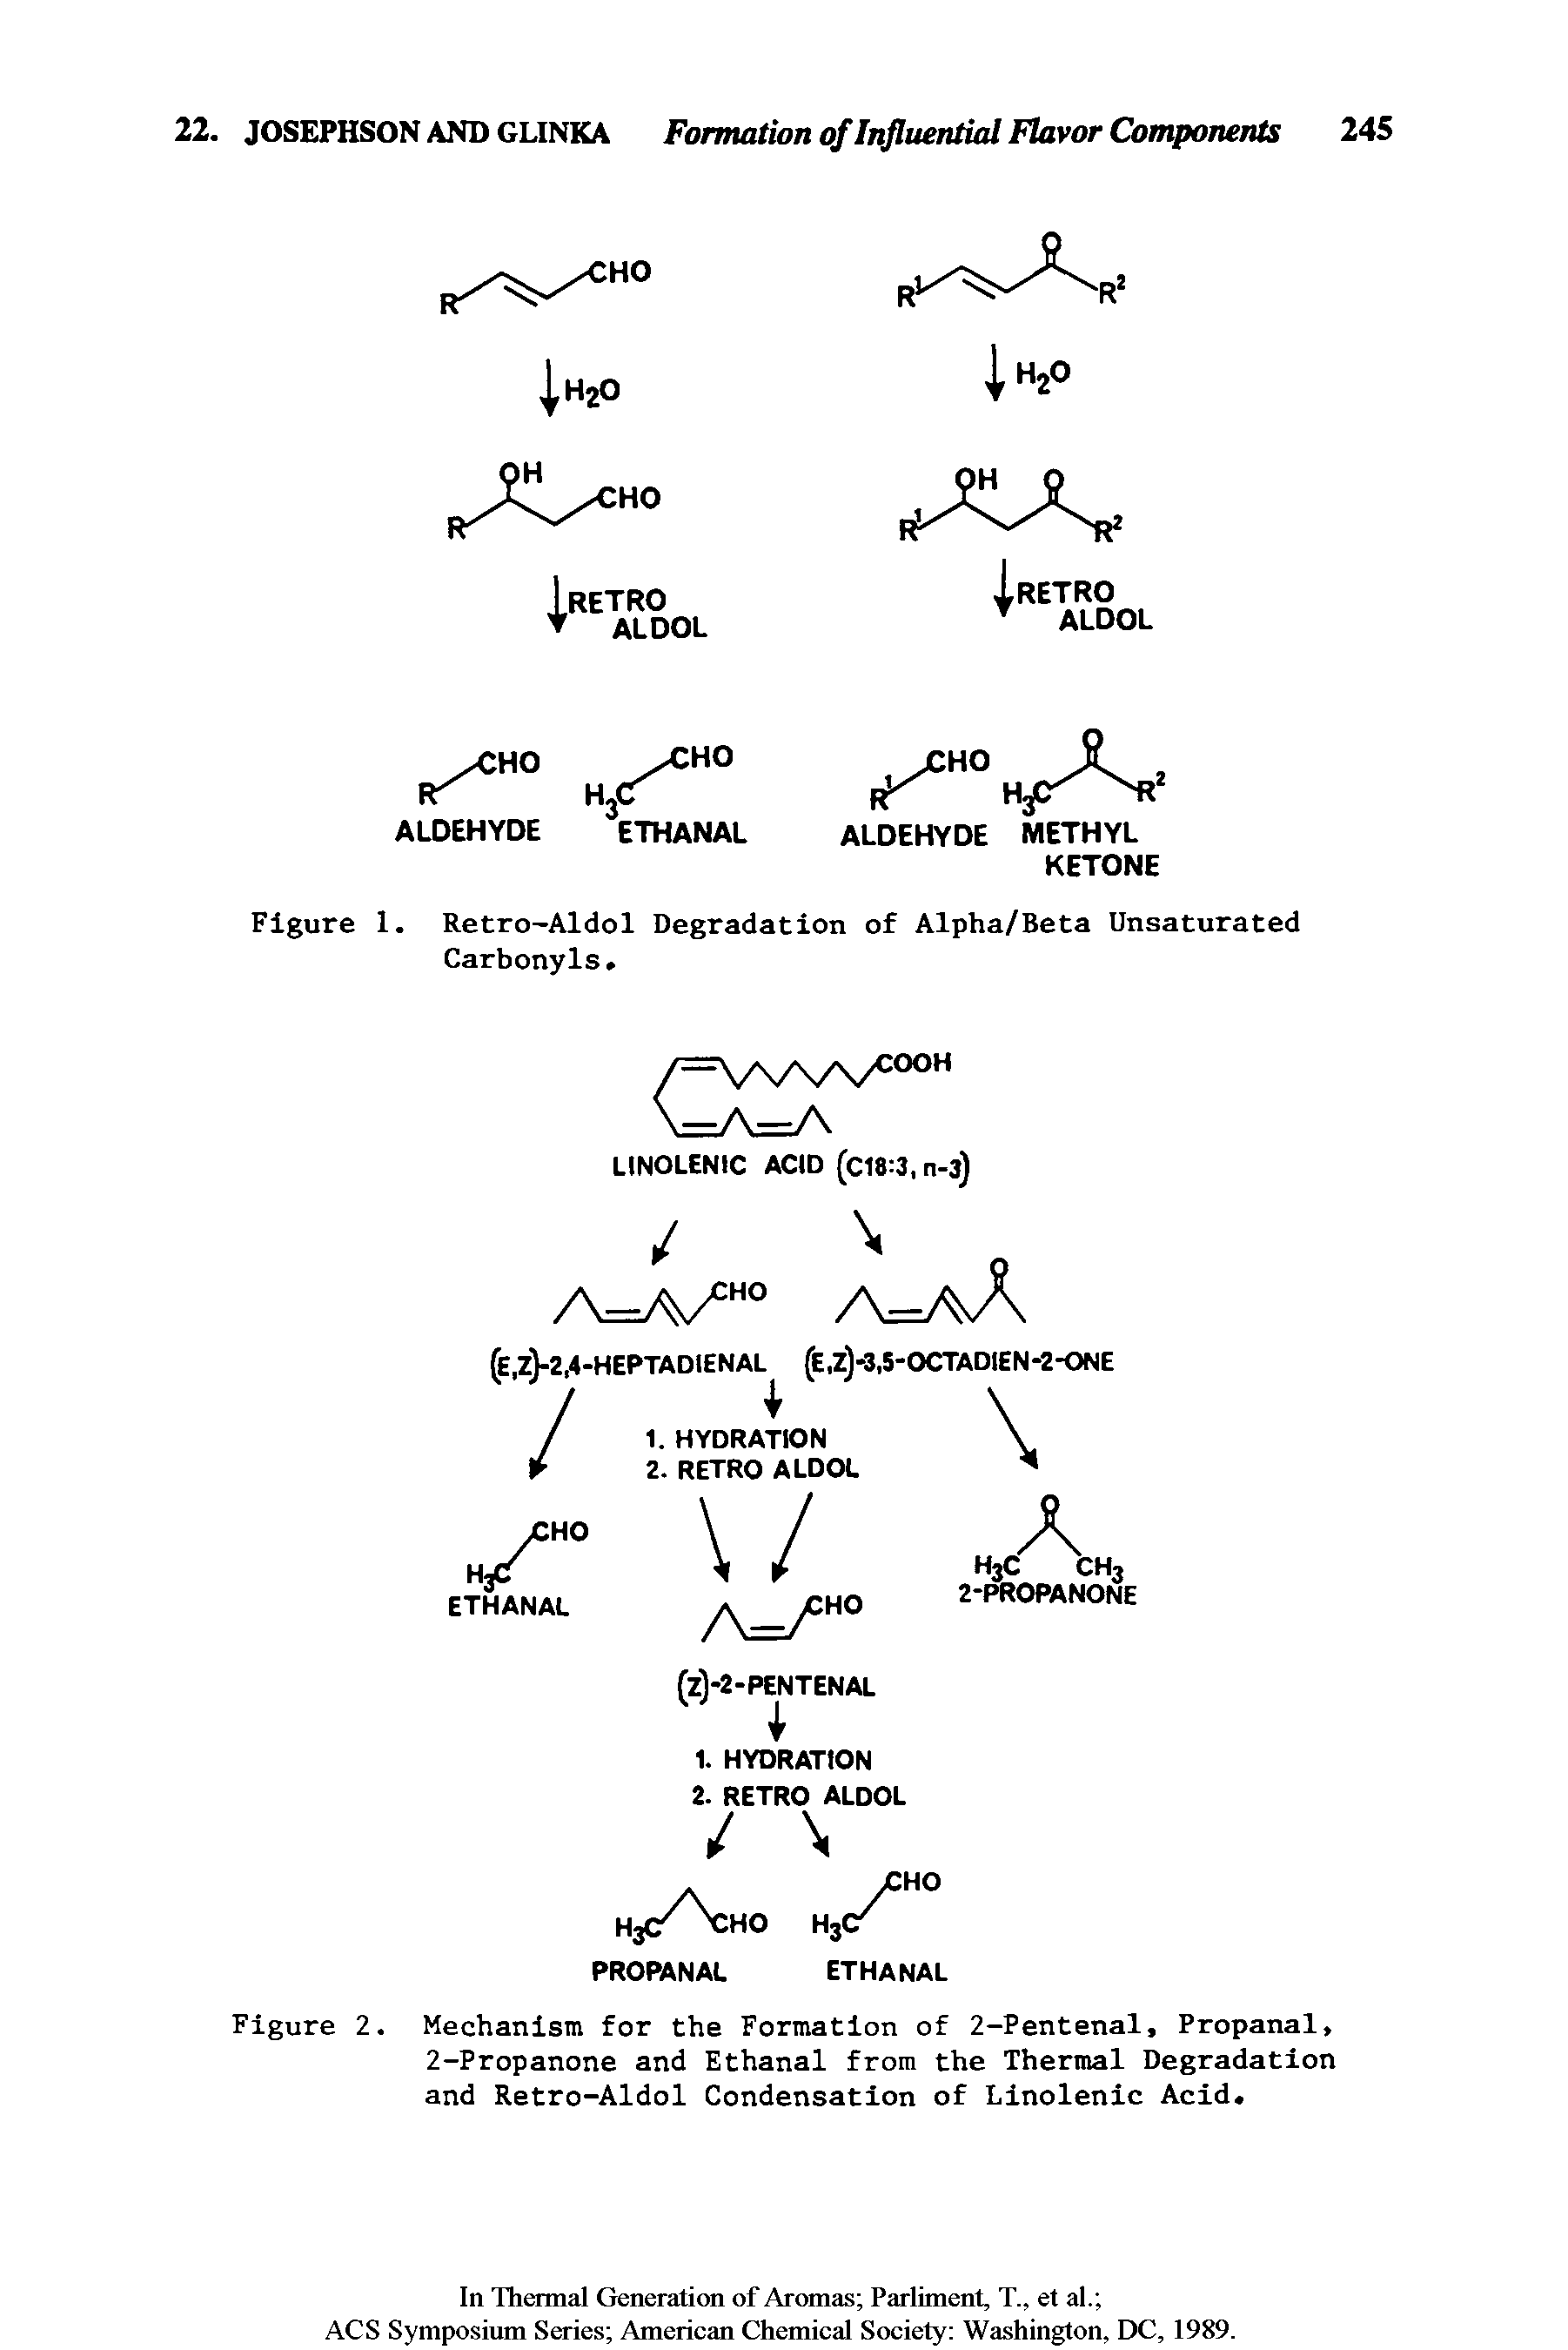 Figure 2. Mechanism for the Formation of 2-Pentenal, Propanal, 2-Propanone and Ethanal from the Thermal Degradation and Retro-Aldol Condensation of Linolenic Acid.